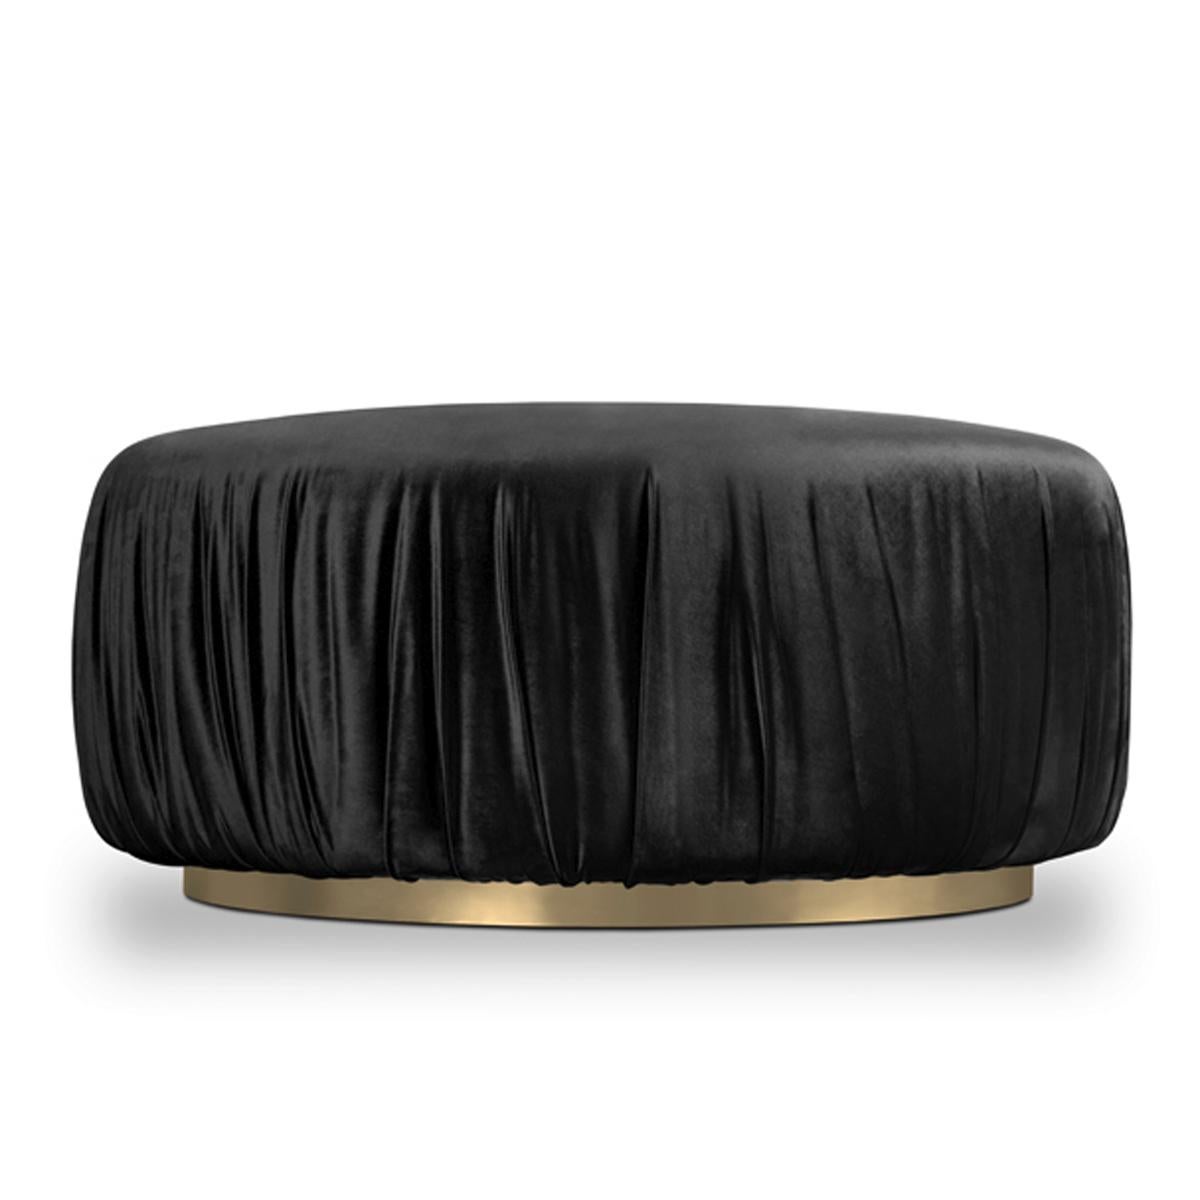 Ottoman Mahal covered with high
quality black pleated fabric. With base
in brass finish. Also available with other
fabrics on request.